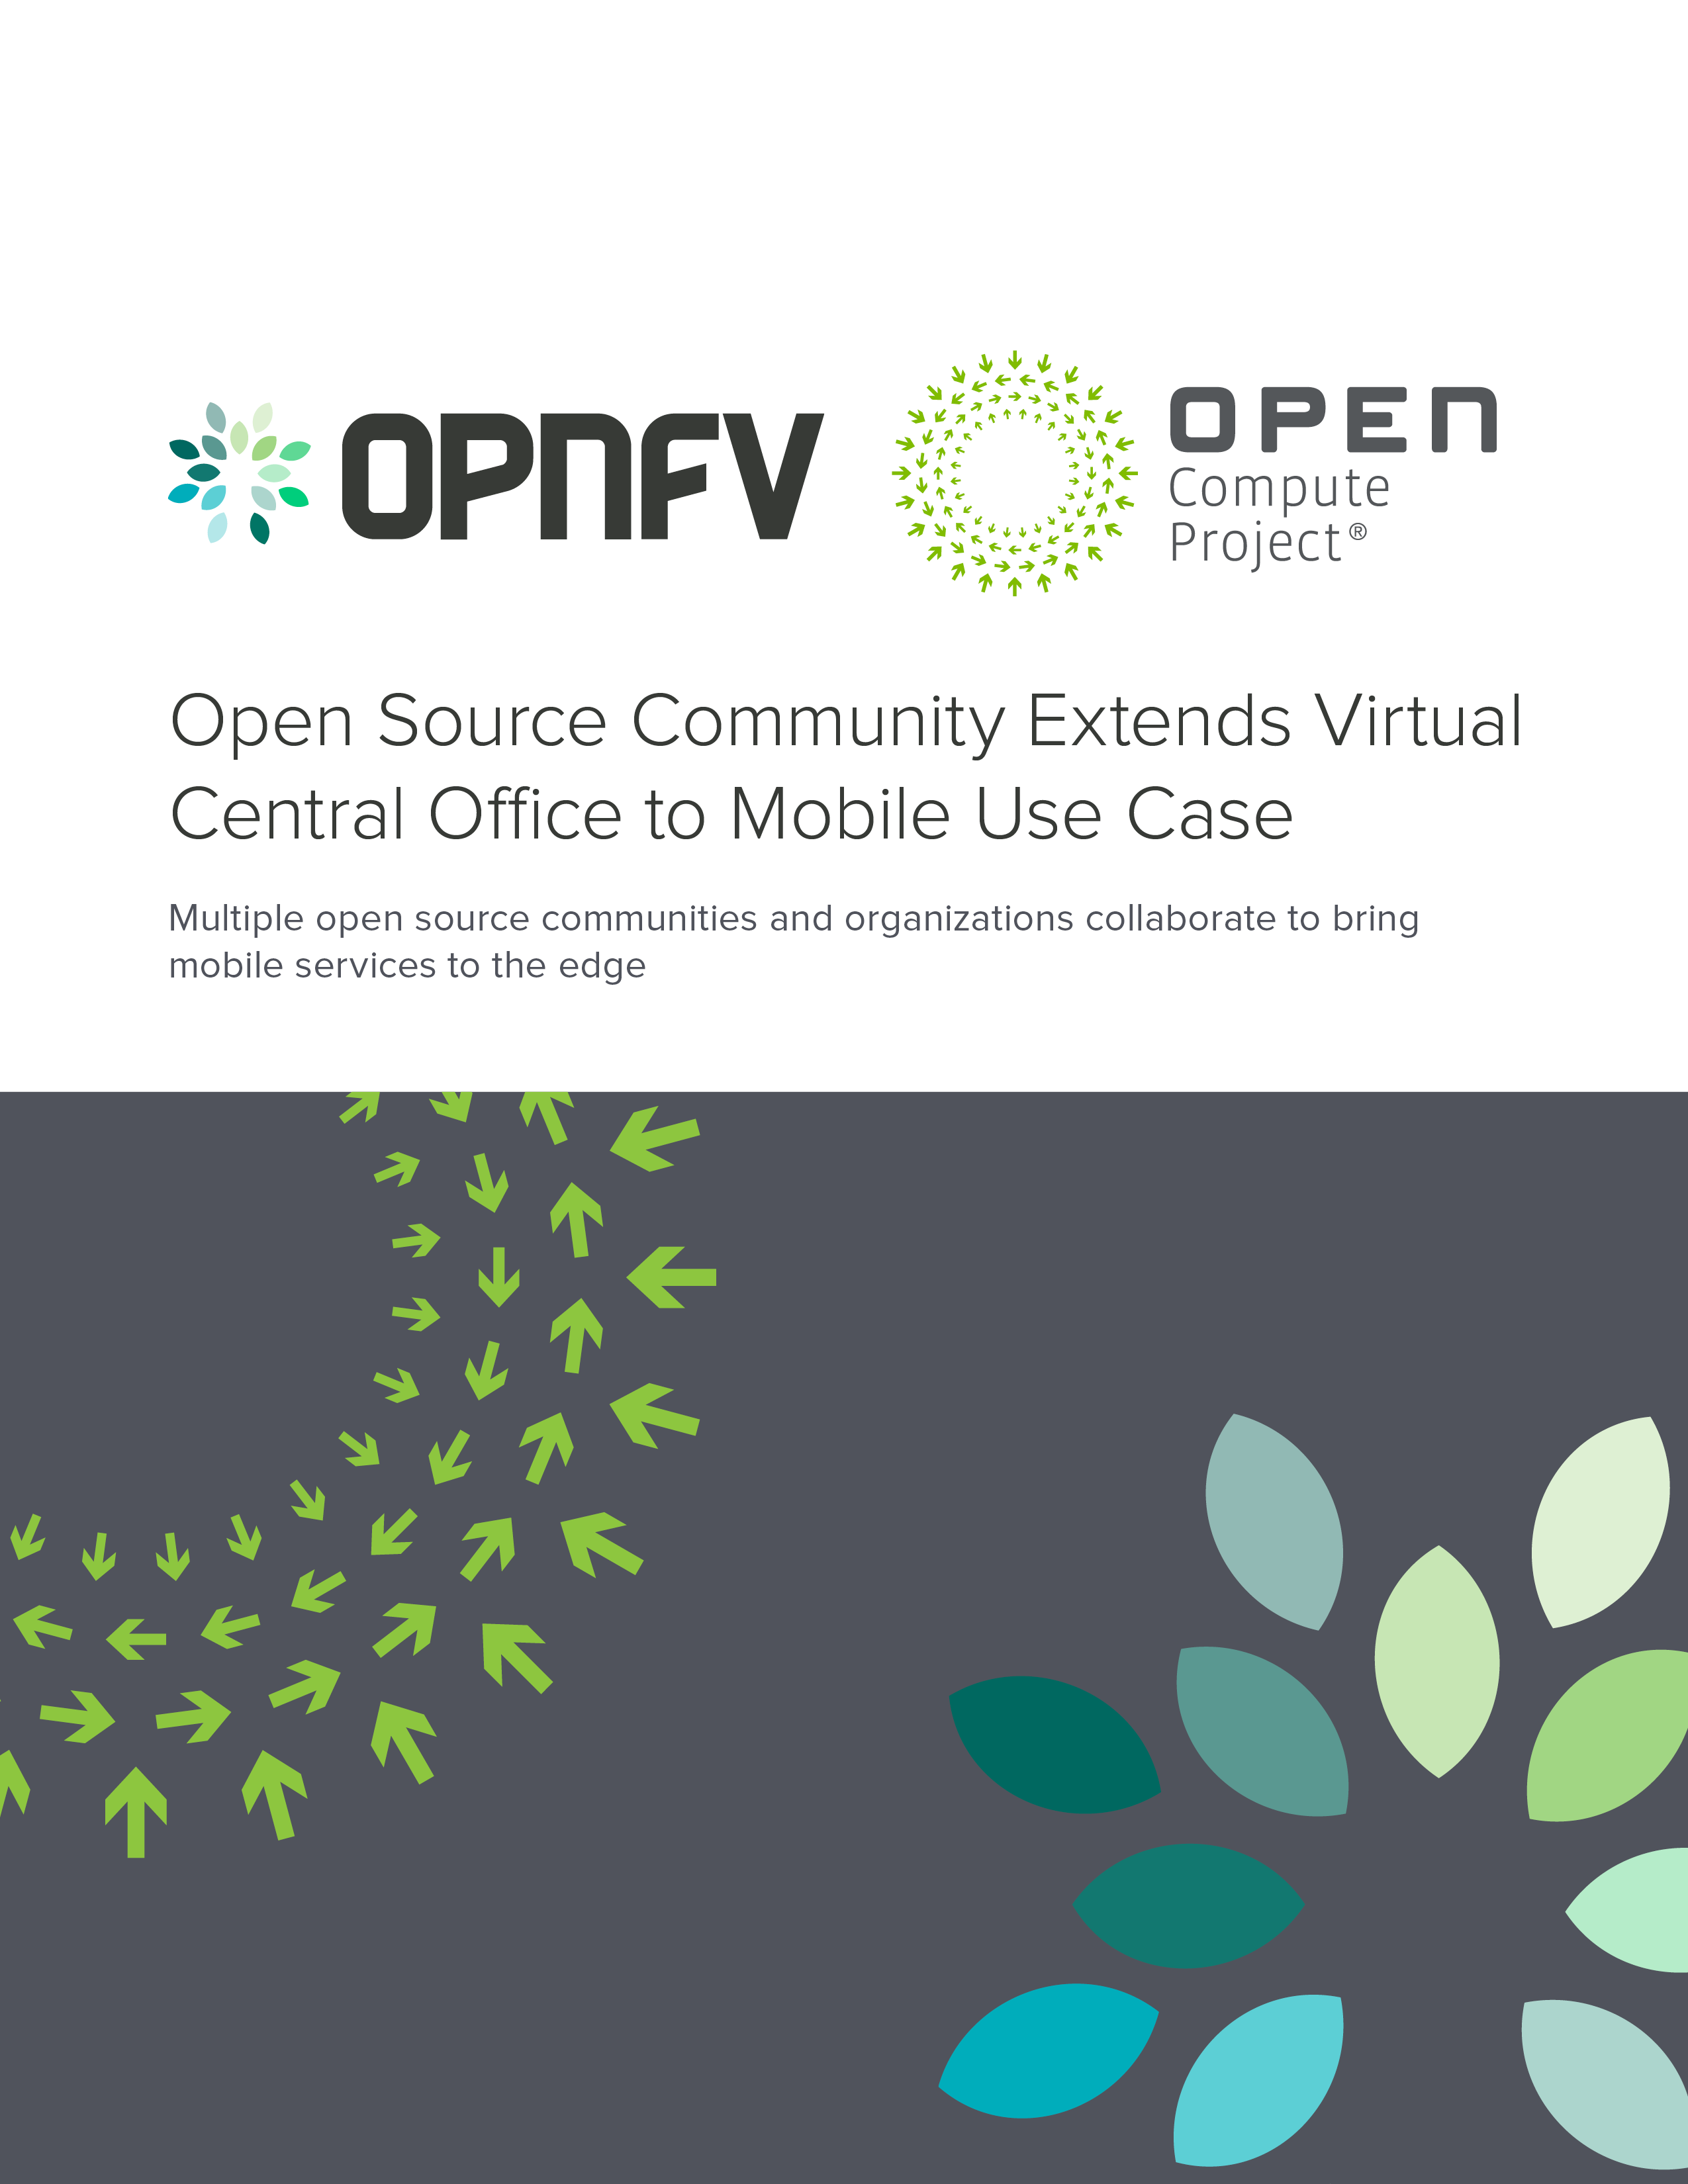 Open Source Community Extends Virtual Central Office to Mobile Use Case